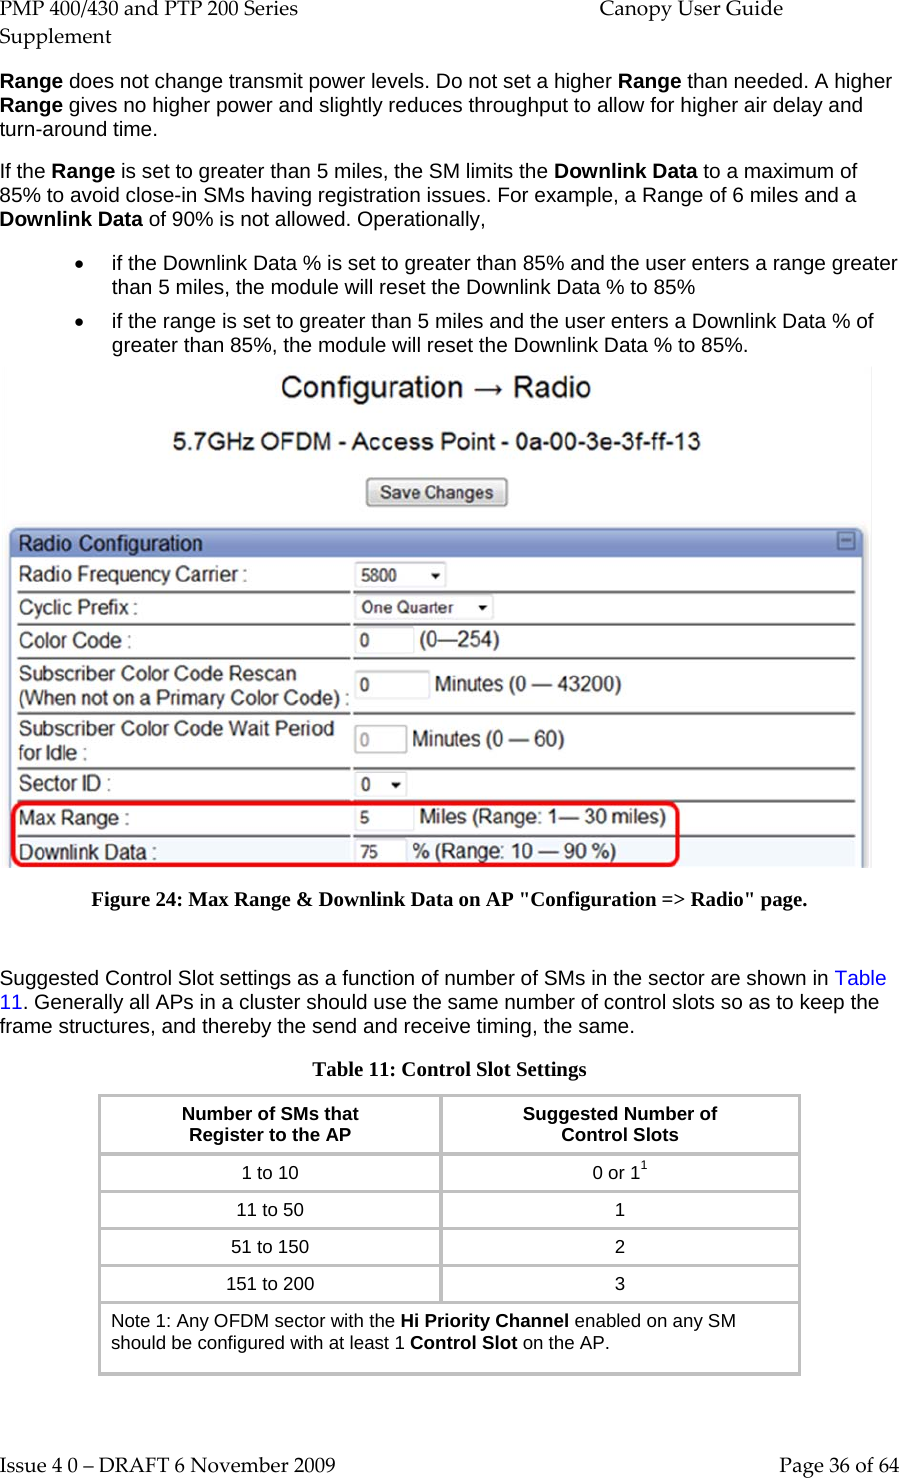 PMP 400/430 and PTP 200 Series  Canopy User Guide Supplement Issue 4 0 – DRAFT 6 November 2009    Page 36 of 64 Range does not change transmit power levels. Do not set a higher Range than needed. A higher Range gives no higher power and slightly reduces throughput to allow for higher air delay and turn-around time. If the Range is set to greater than 5 miles, the SM limits the Downlink Data to a maximum of 85% to avoid close-in SMs having registration issues. For example, a Range of 6 miles and a Downlink Data of 90% is not allowed. Operationally, • if the Downlink Data % is set to greater than 85% and the user enters a range greater than 5 miles, the module will reset the Downlink Data % to 85% • if the range is set to greater than 5 miles and the user enters a Downlink Data % of greater than 85%, the module will reset the Downlink Data % to 85%.   Figure 24: Max Range &amp; Downlink Data on AP &quot;Configuration =&gt; Radio&quot; page.  Suggested Control Slot settings as a function of number of SMs in the sector are shown in Table 11. Generally all APs in a cluster should use the same number of control slots so as to keep the frame structures, and thereby the send and receive timing, the same. Table 11: Control Slot Settings Number of SMs that Register to the AP Suggested Number of Control Slots  1 to 10 0 or 11 11 to 50  1 51 to 150  2 151 to 200  3 Note 1: Any OFDM sector with the Hi Priority Channel enabled on any SM should be configured with at least 1 Control Slot on the AP.   